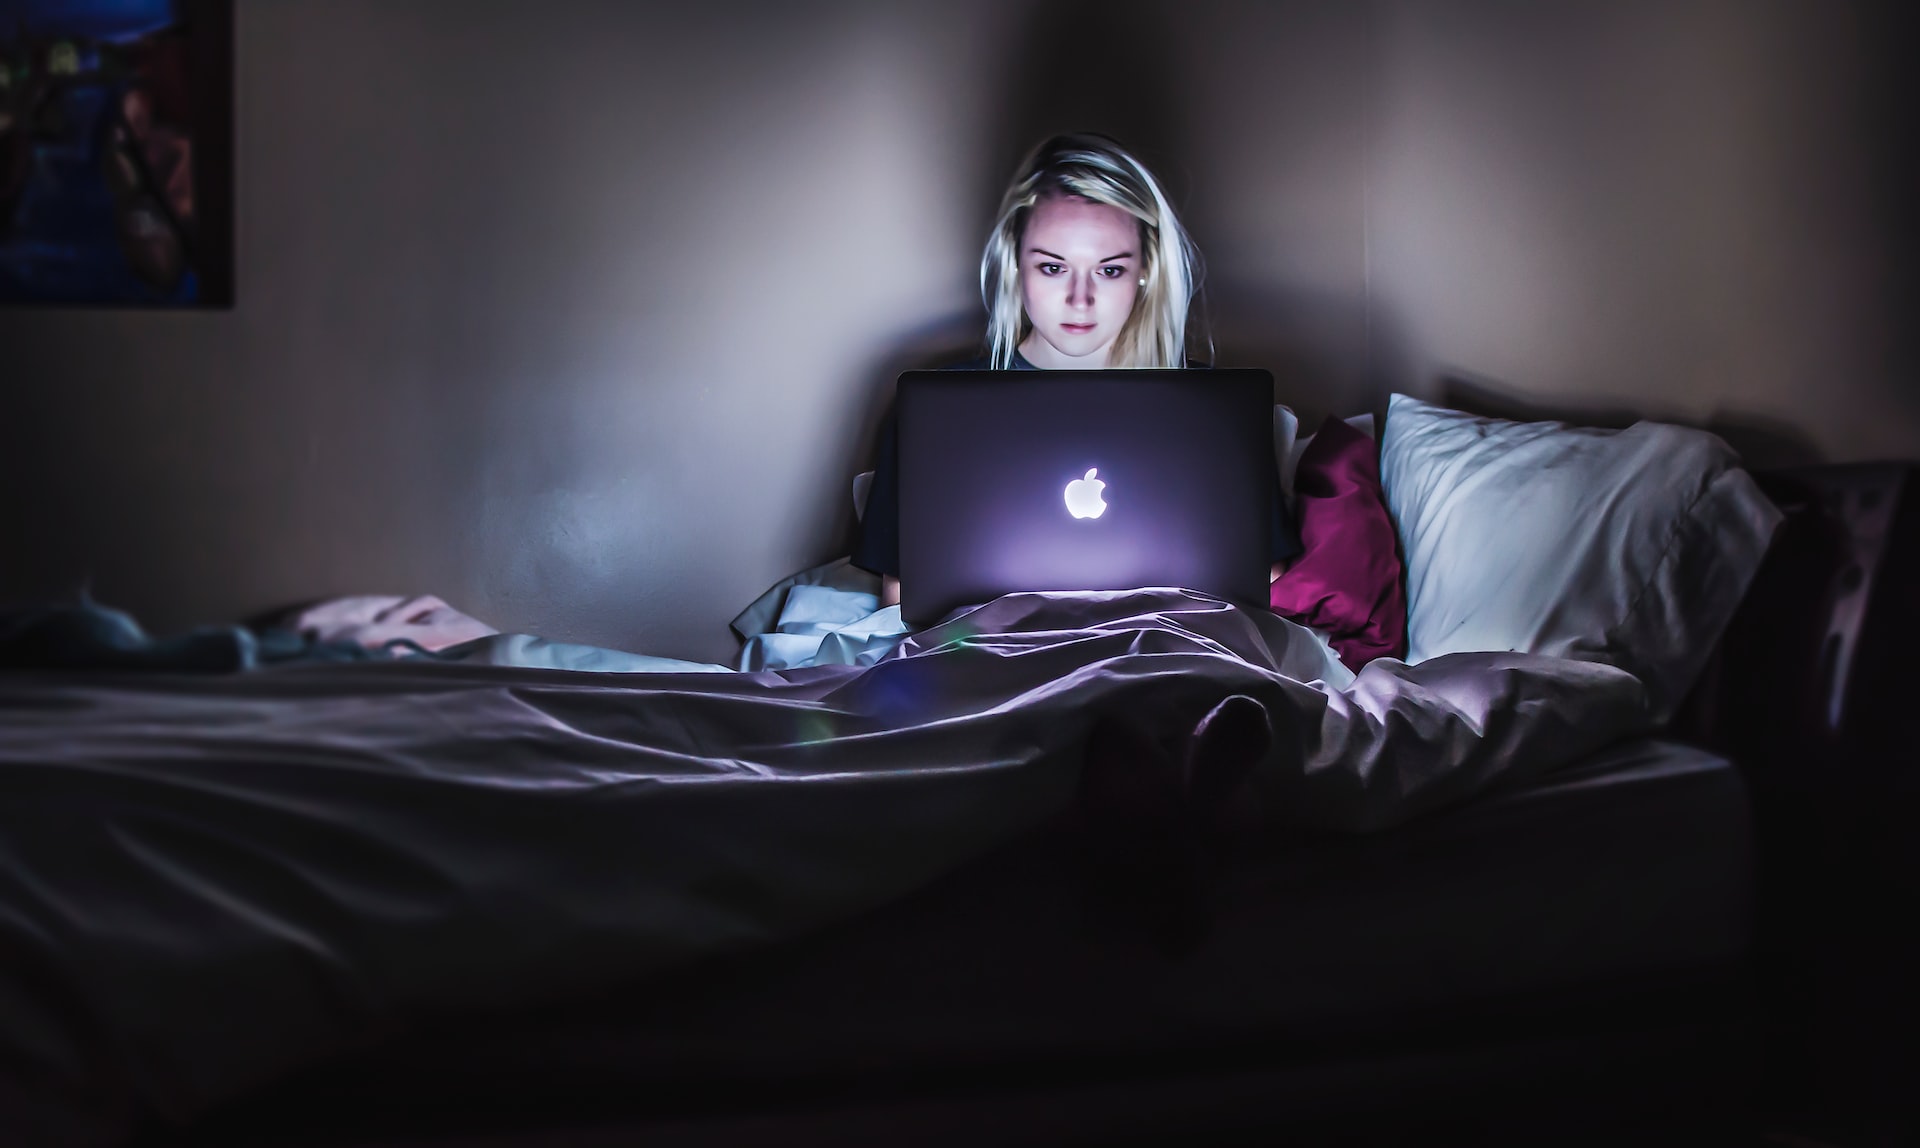 A woman on her bed, dealing with stress unhealthily by going on her laptop at night